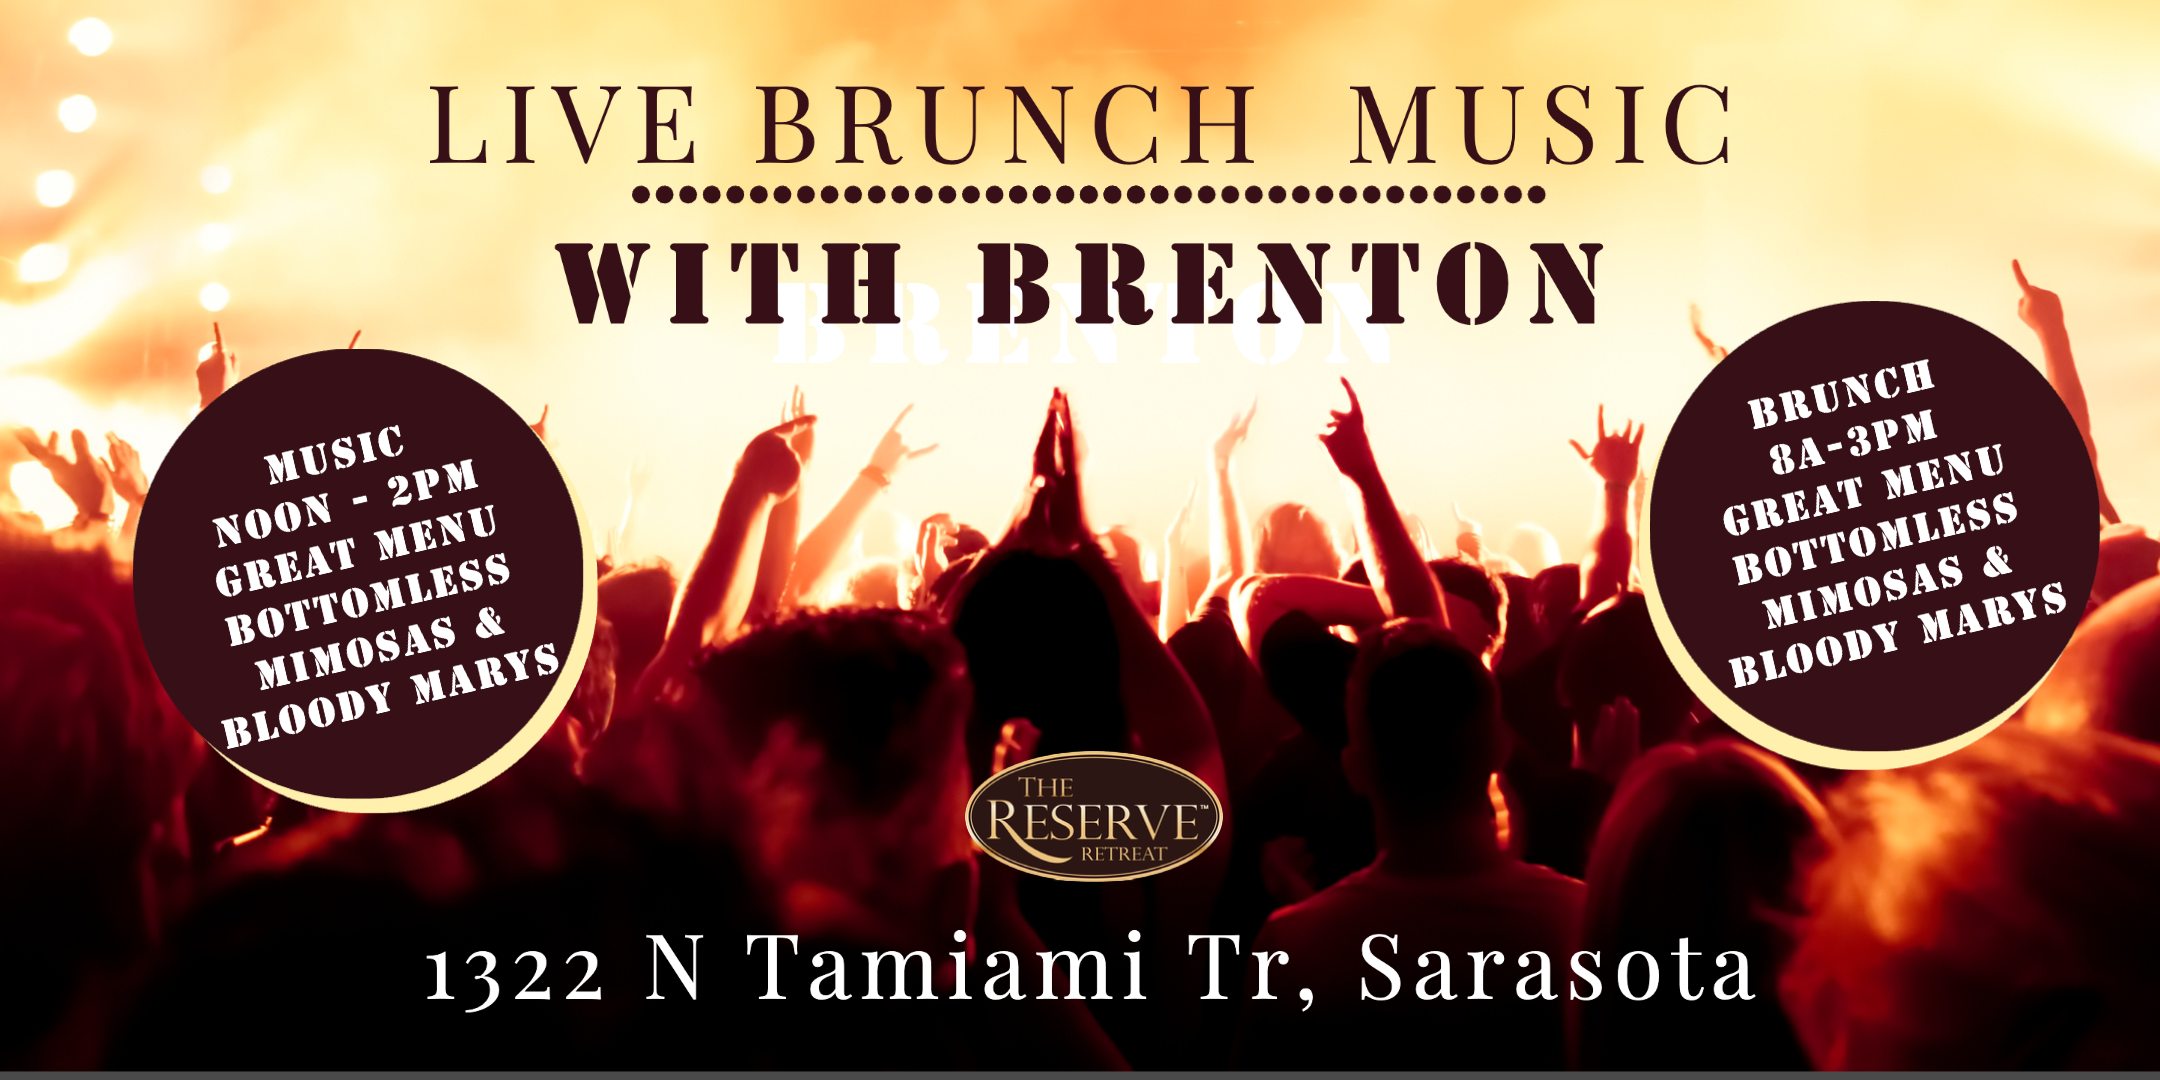 Sunday Brunch live music with Brenton at The Reserve Retreat